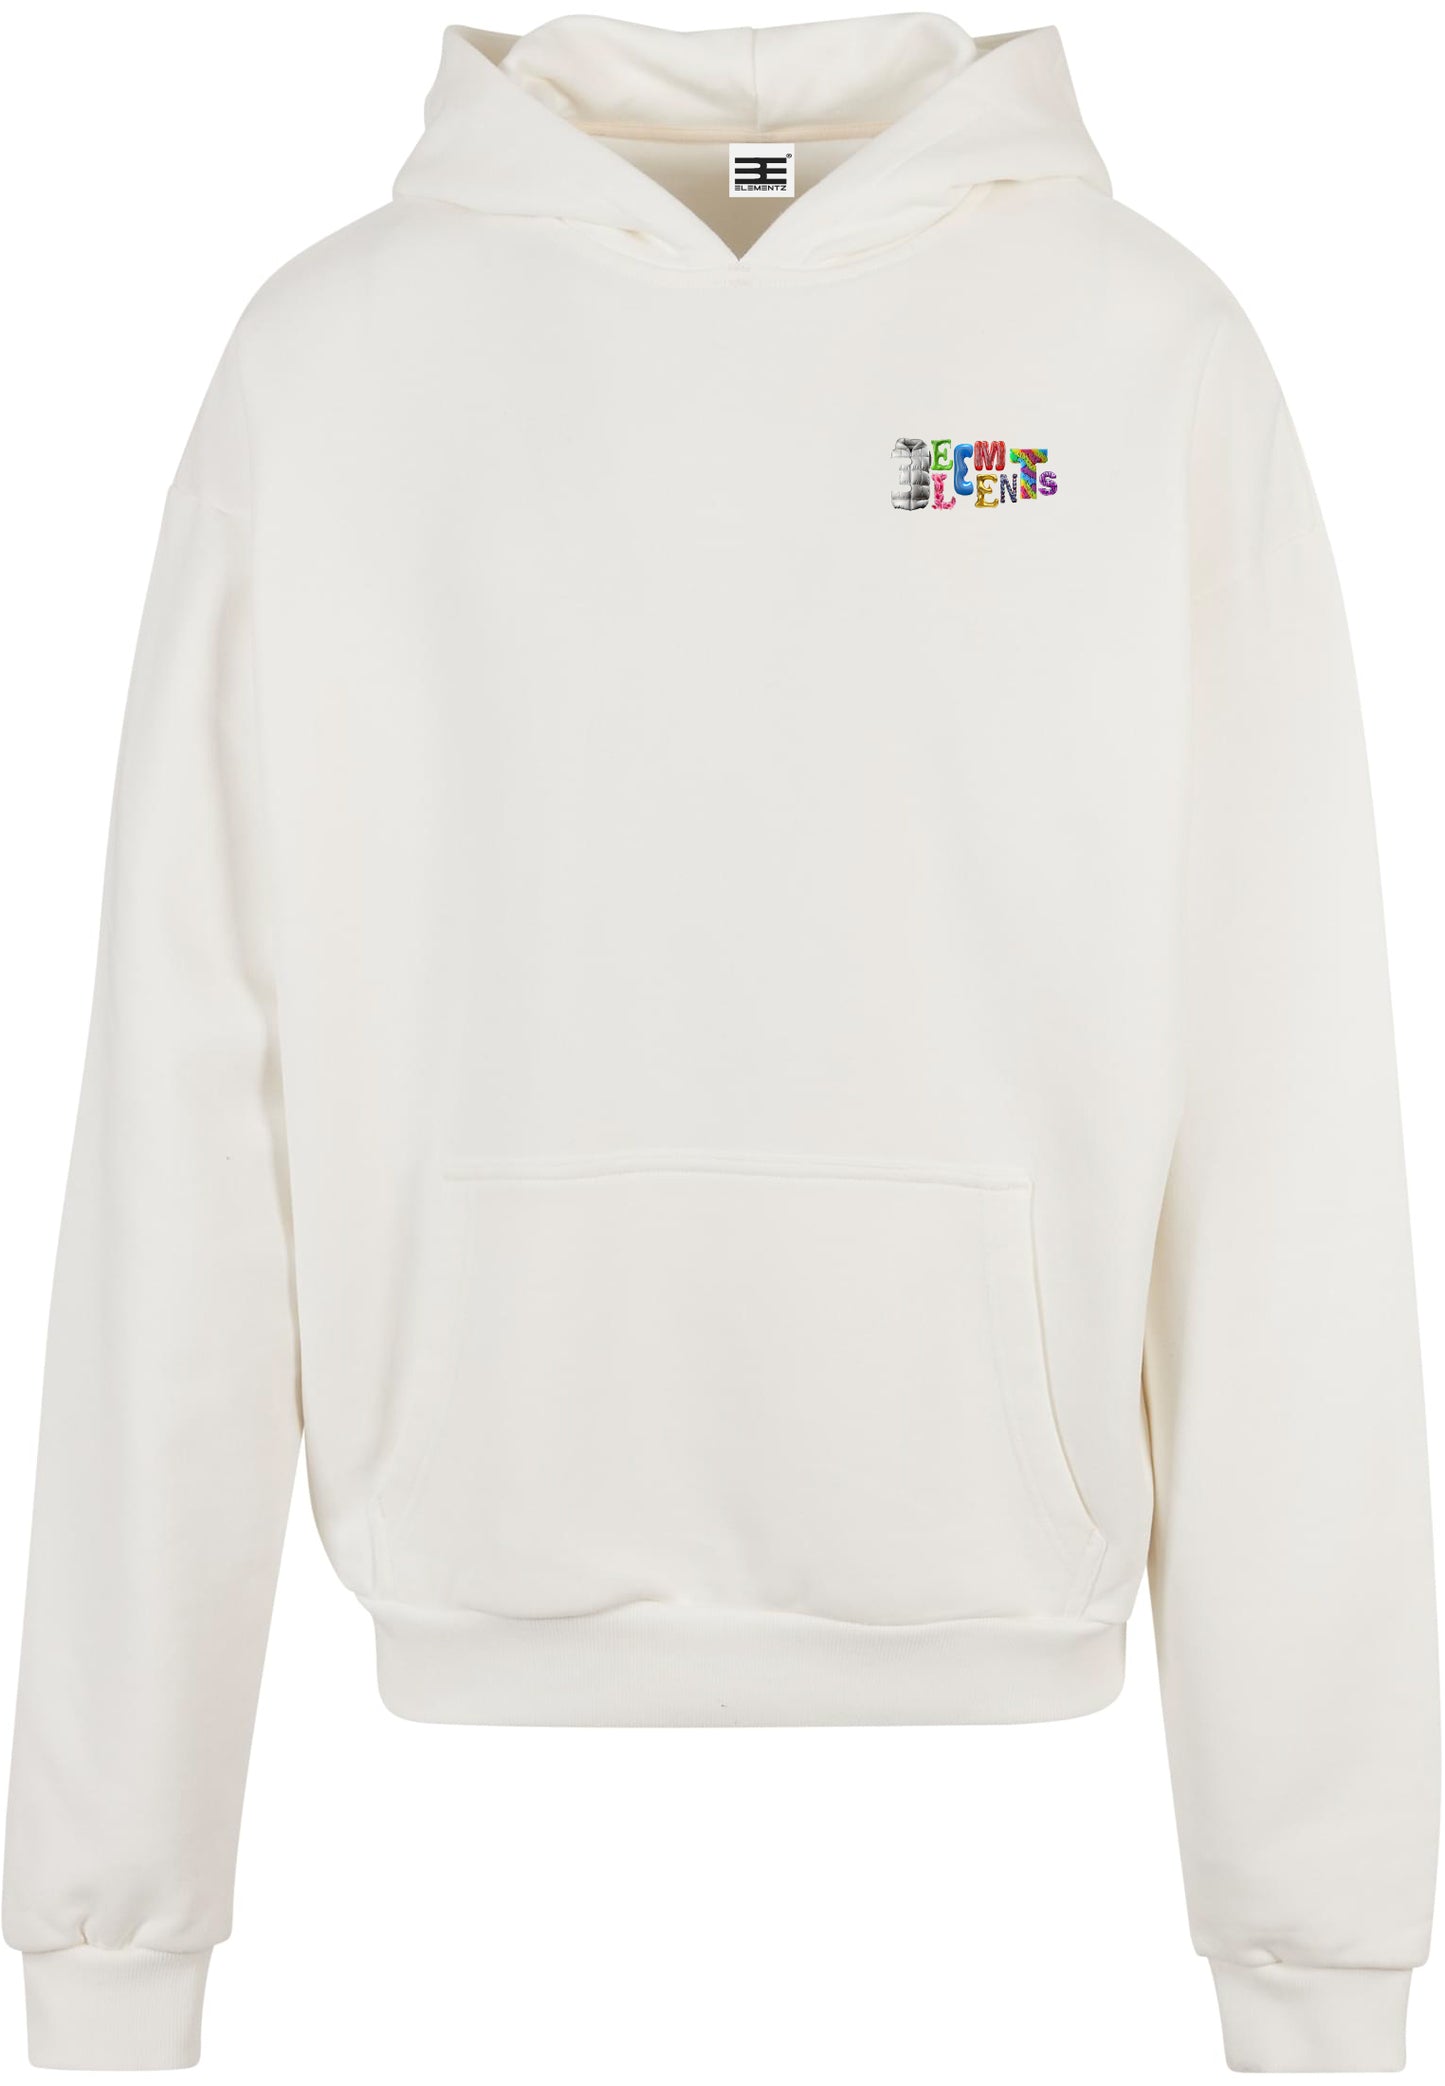 3E Element(s) Hoodie Dyewhite